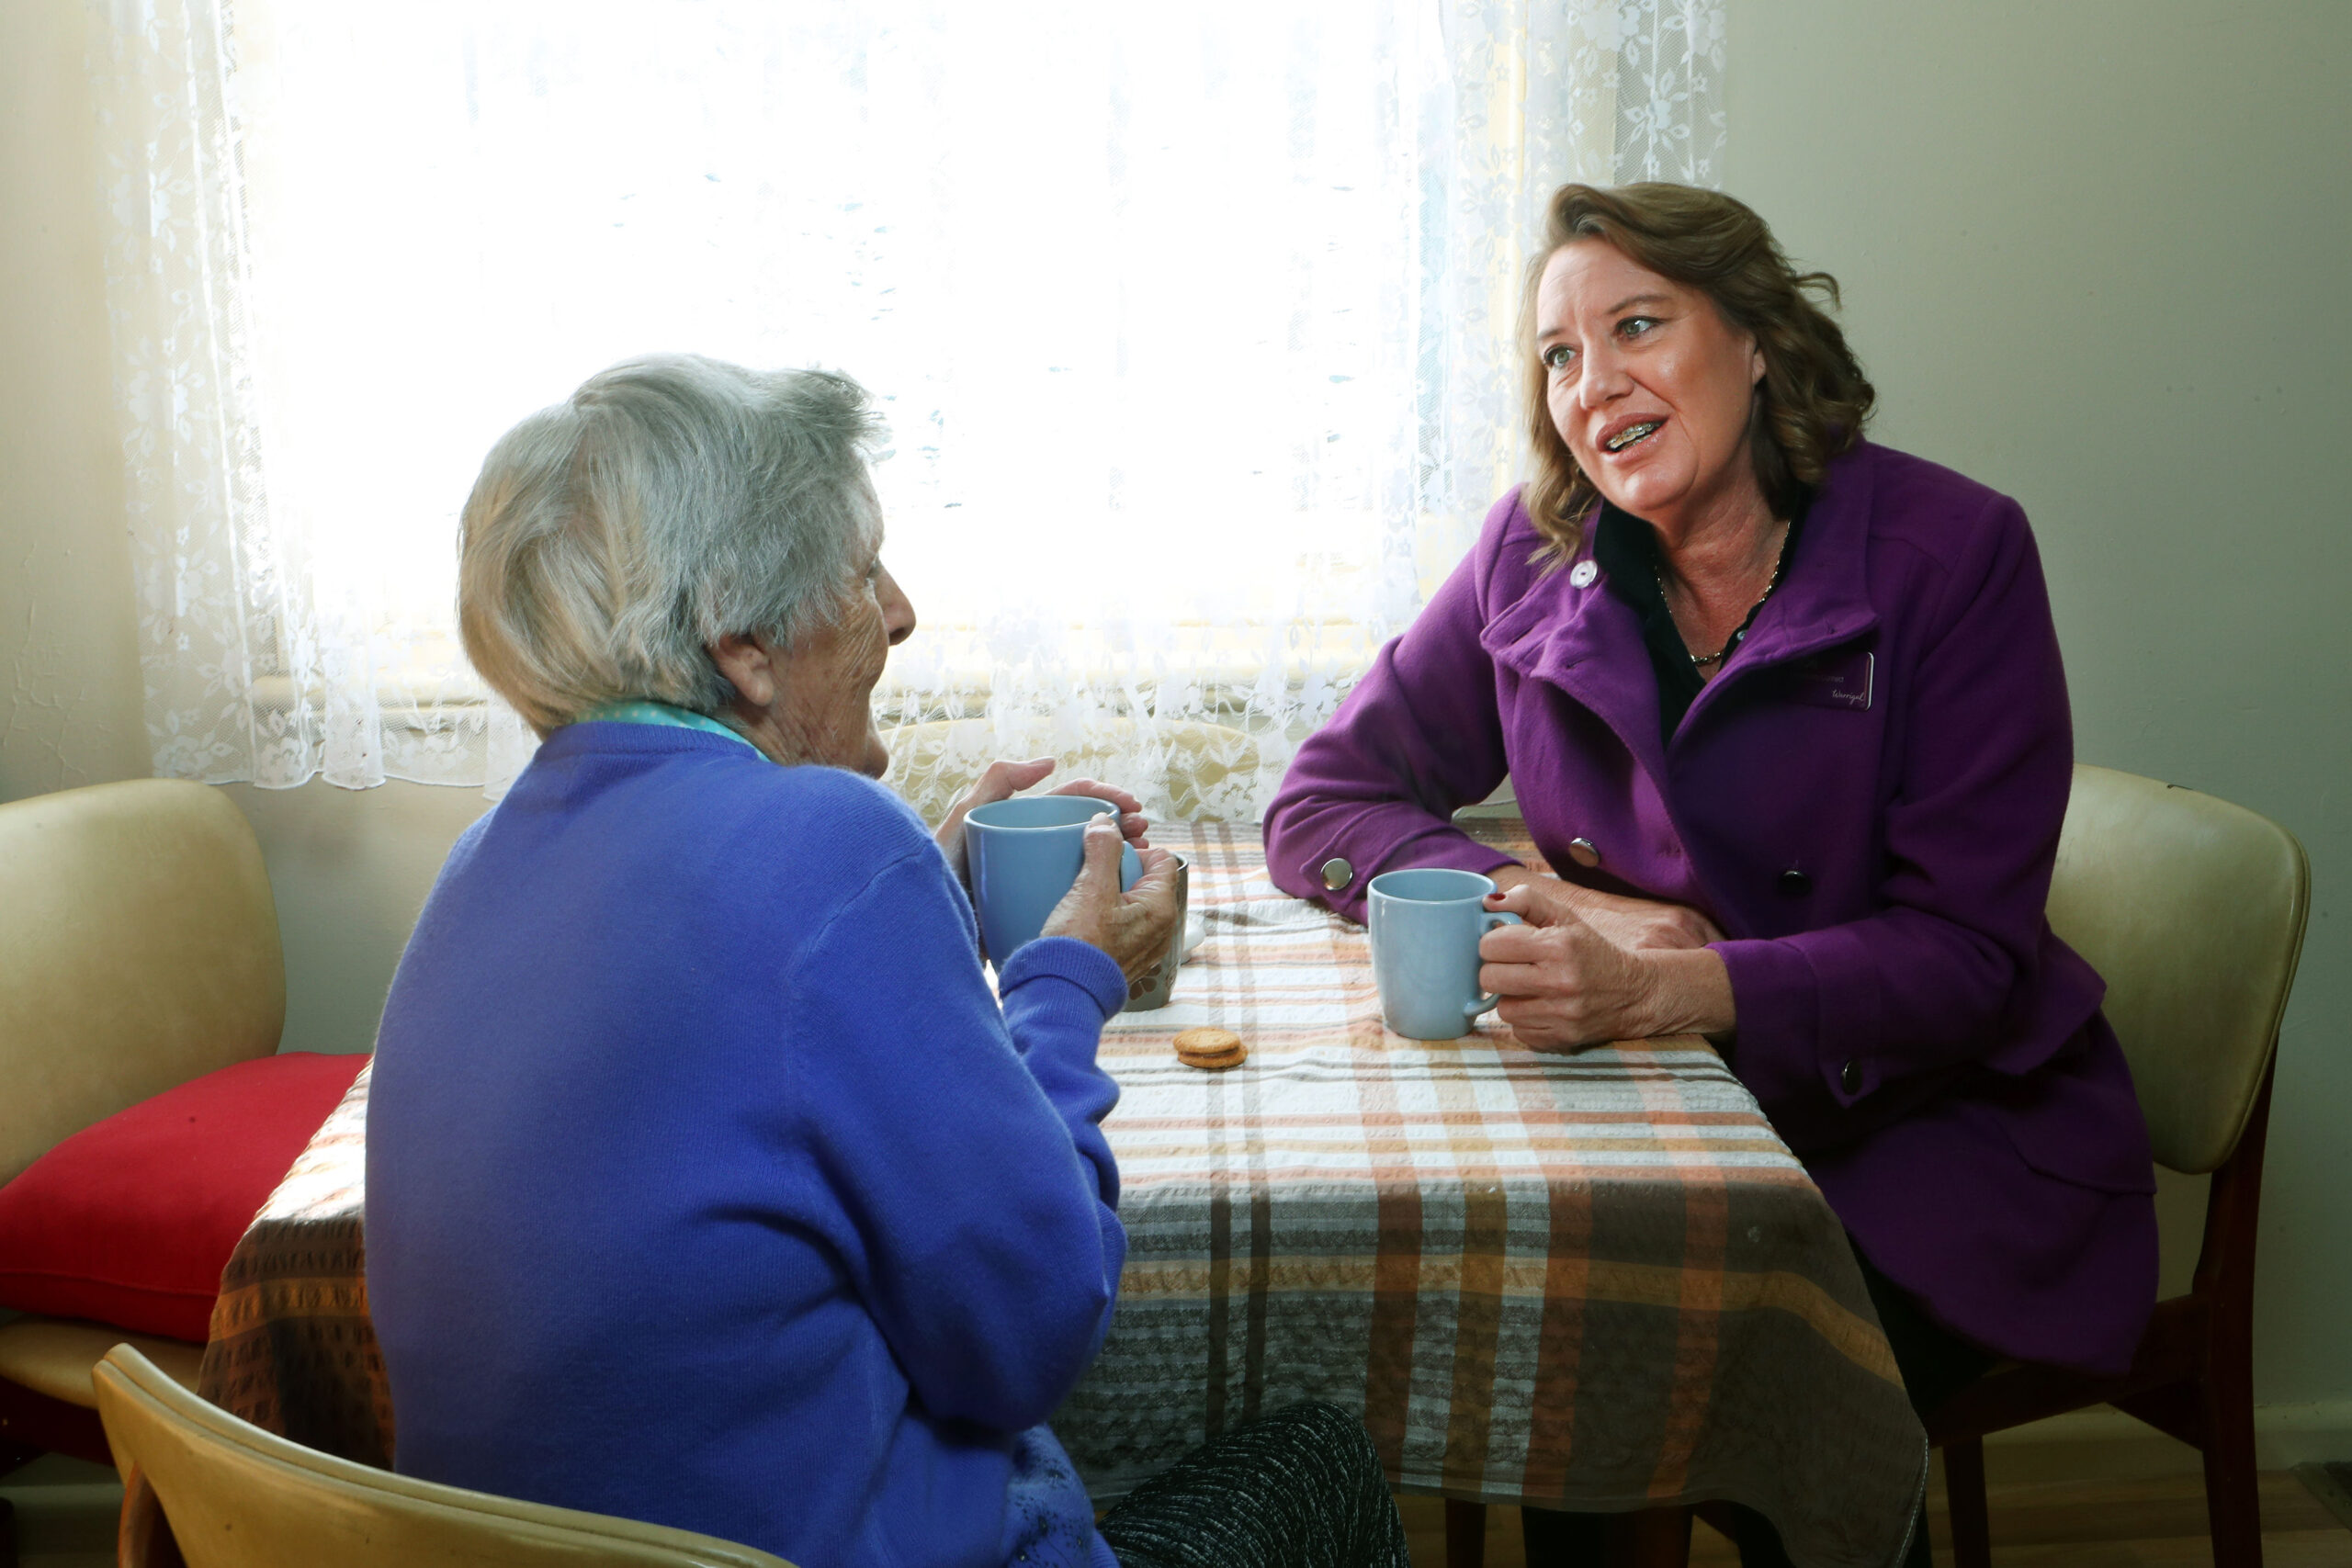 Carer providing having a friendly chat with a resident.